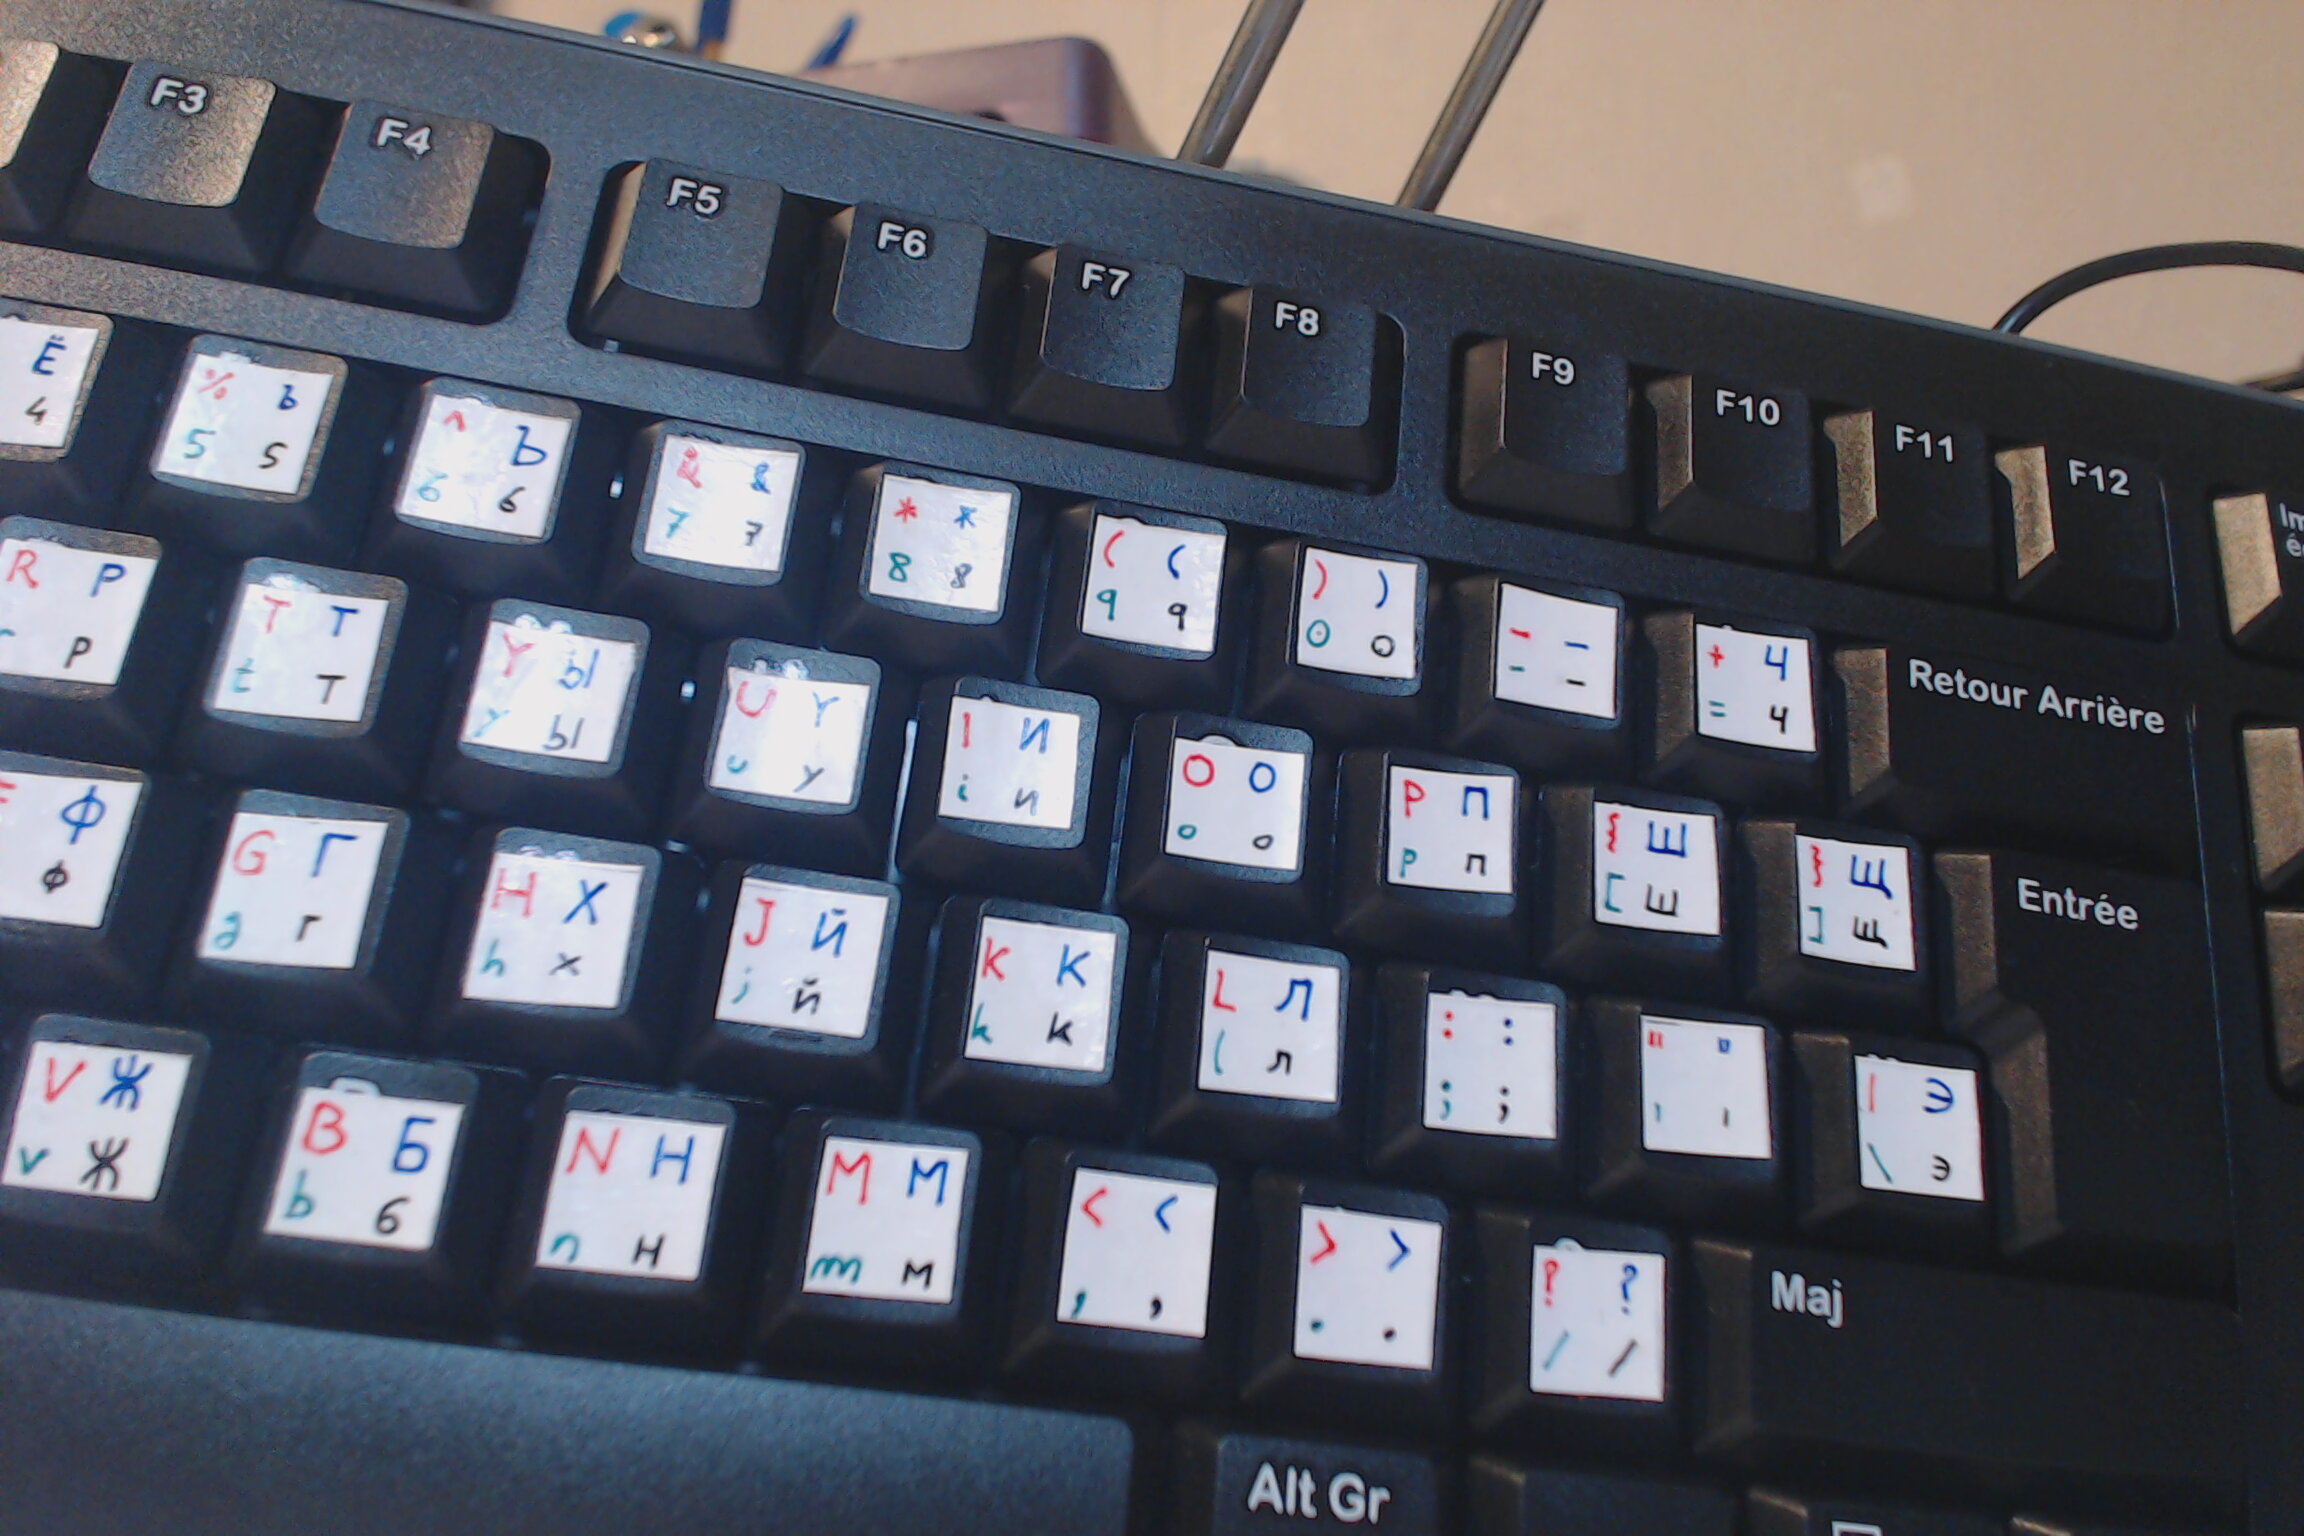 My hand-made Russian (phonetic) keyboards, image 9 of 14